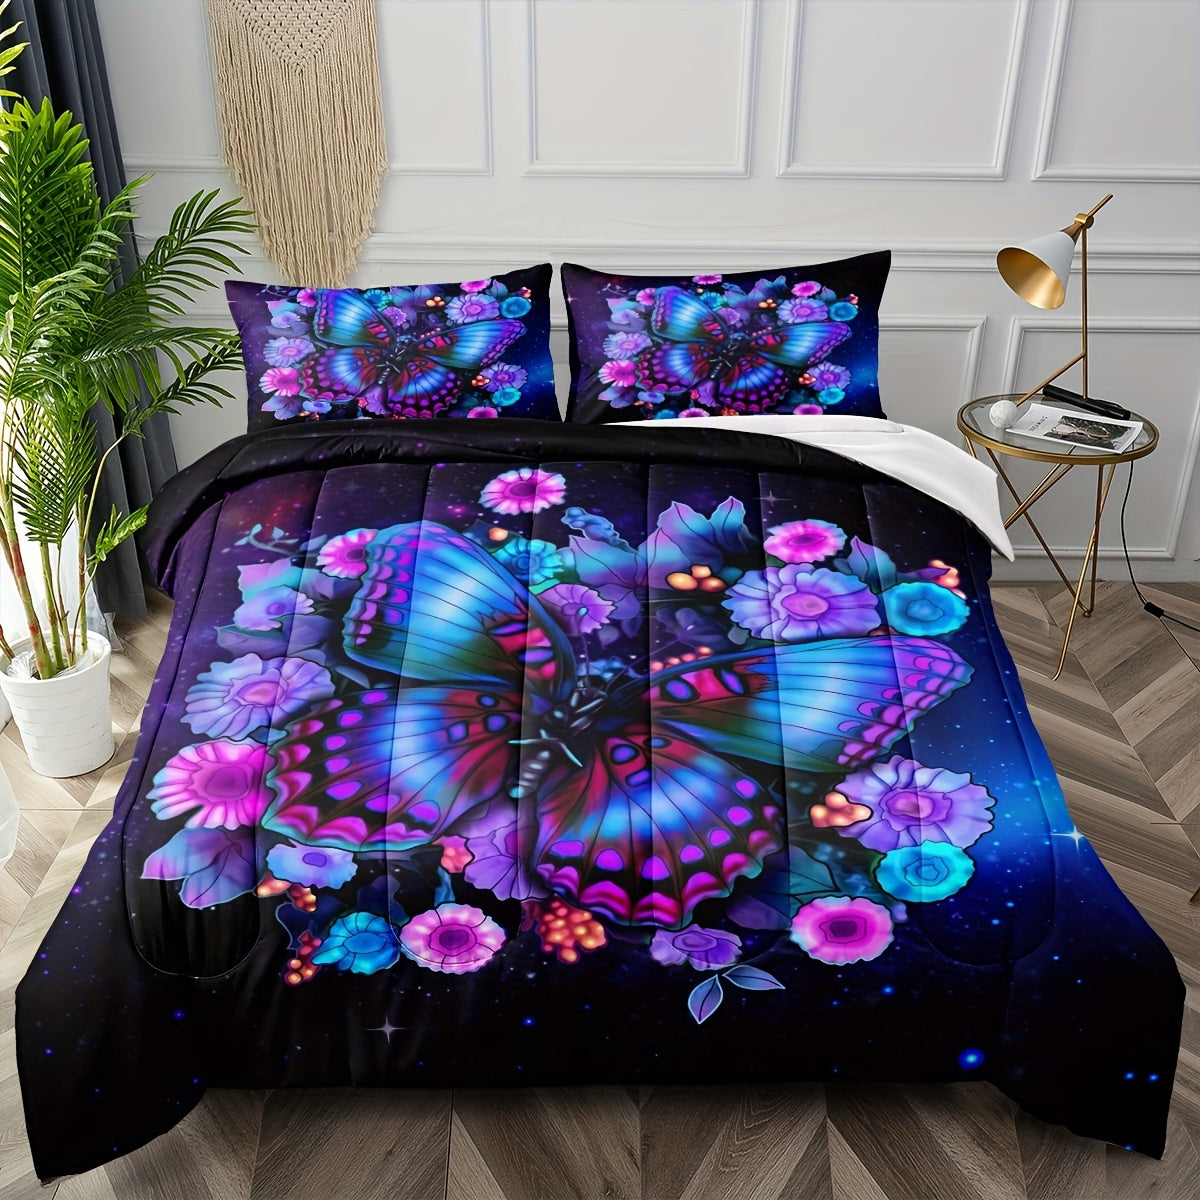 2/3pcs Butterfly Bedding Comforter Set Starry Sky Bedding Butterfly Floral Printed Pattern Quilt Bedding Set For Girls Bedroom All Season With Comforter And Pillowcases Purple Butterfly Comforter (1*Comforter + 1/2*Pillowcase, Without Core)